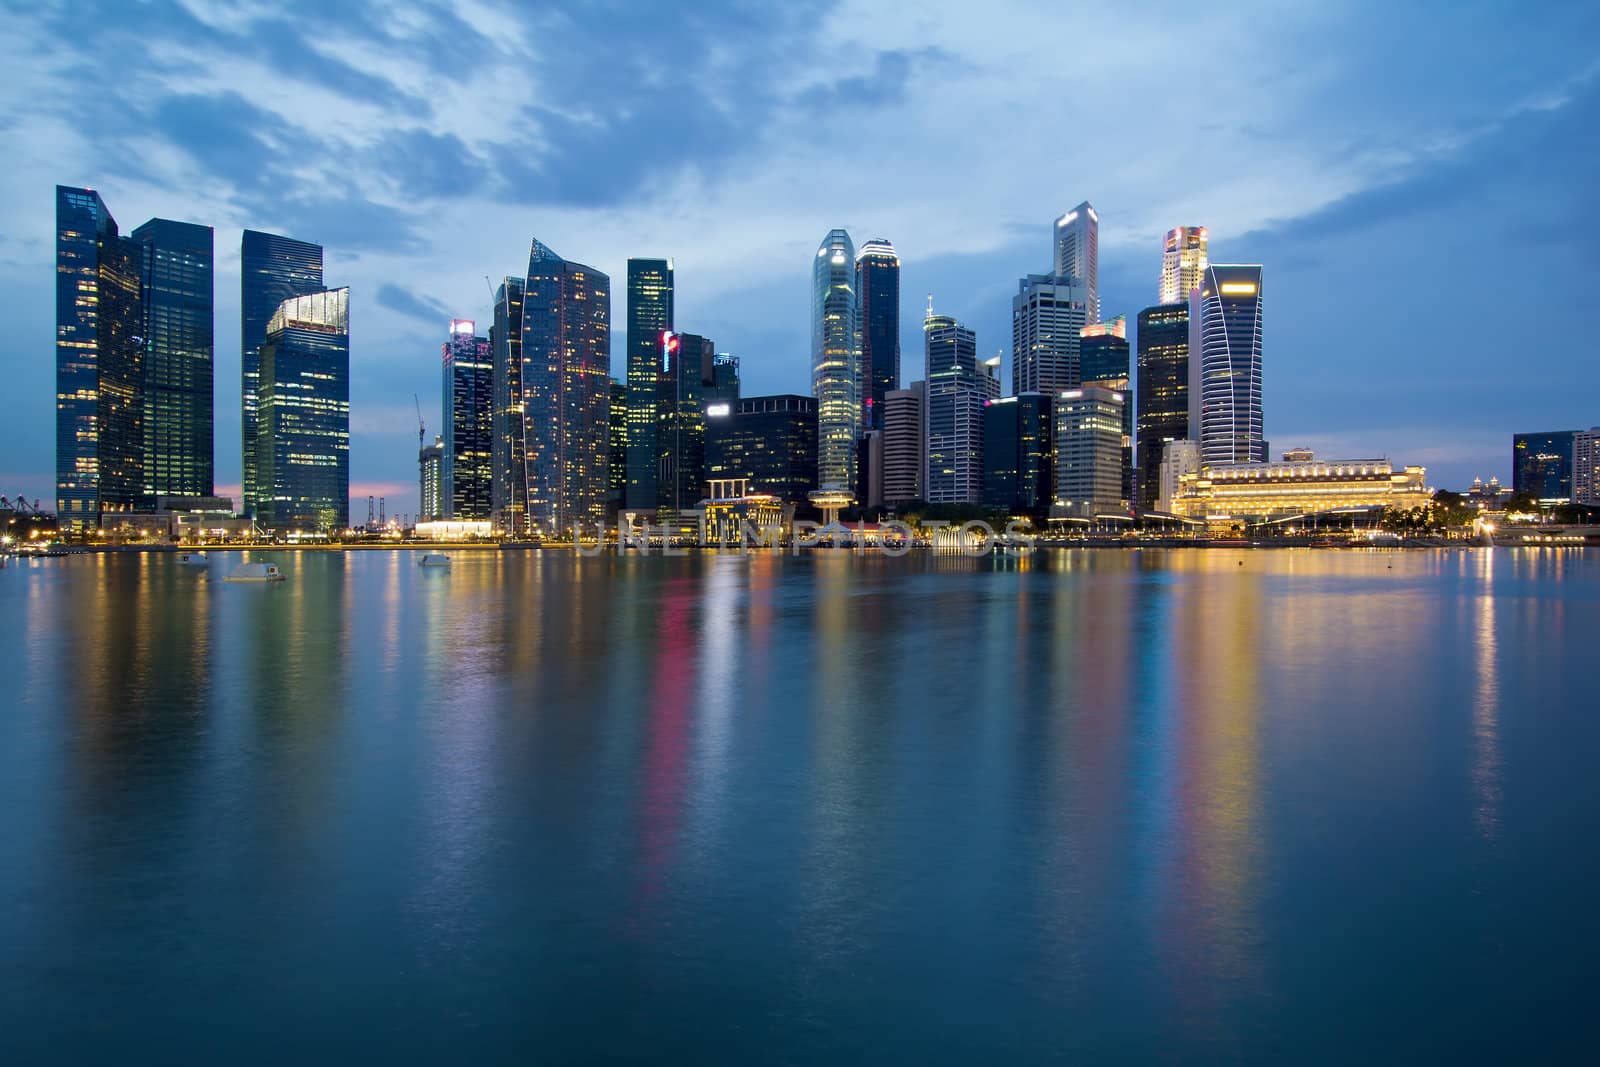 Singapore City Skyline at Blue Hour by jpldesigns